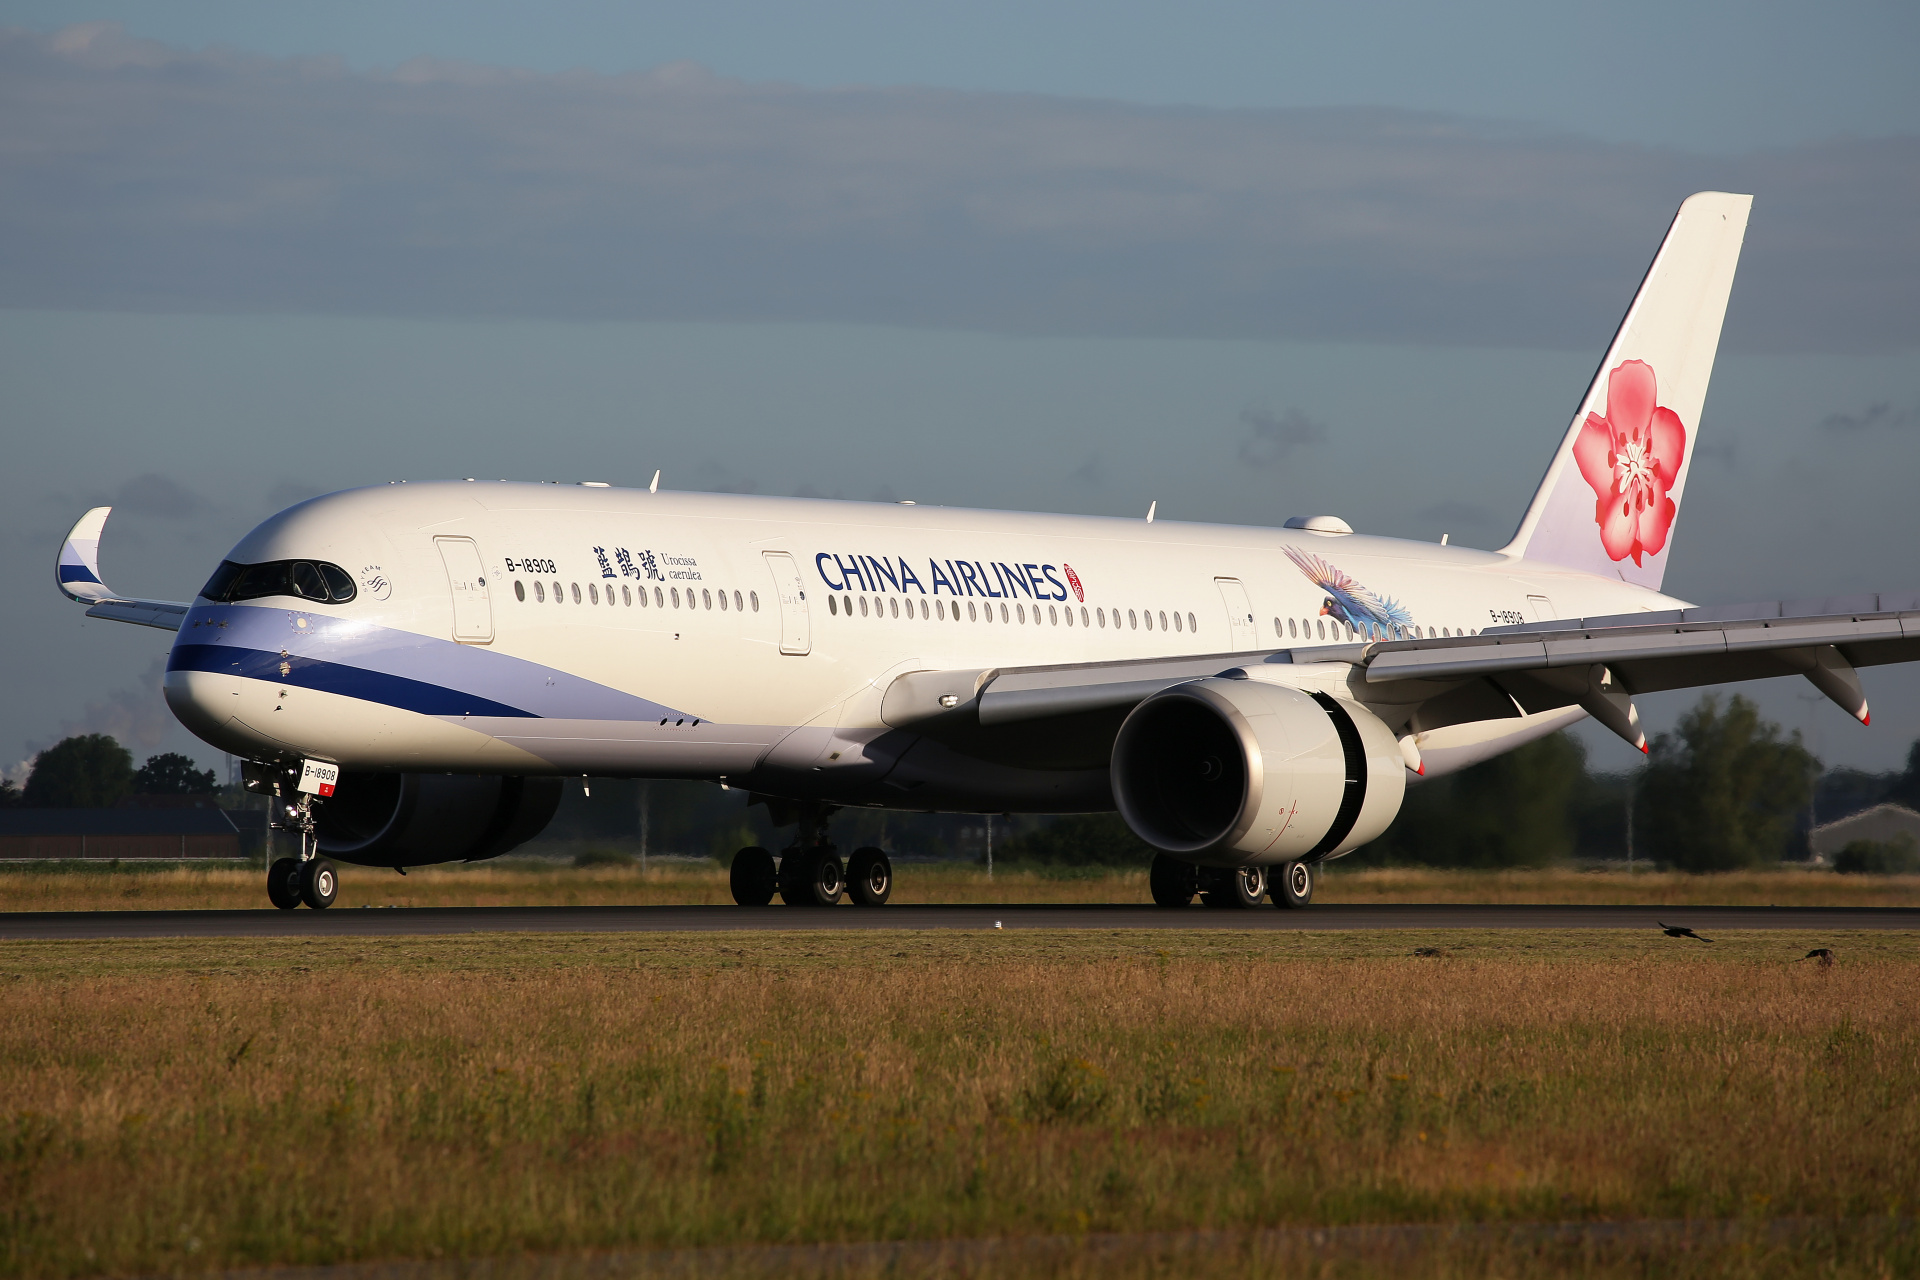 B-18908, China Airlines (Urocissa caerulea - Taiwan Blue Magpie livery) (Aircraft » Schiphol Spotting » Airbus A350-900)